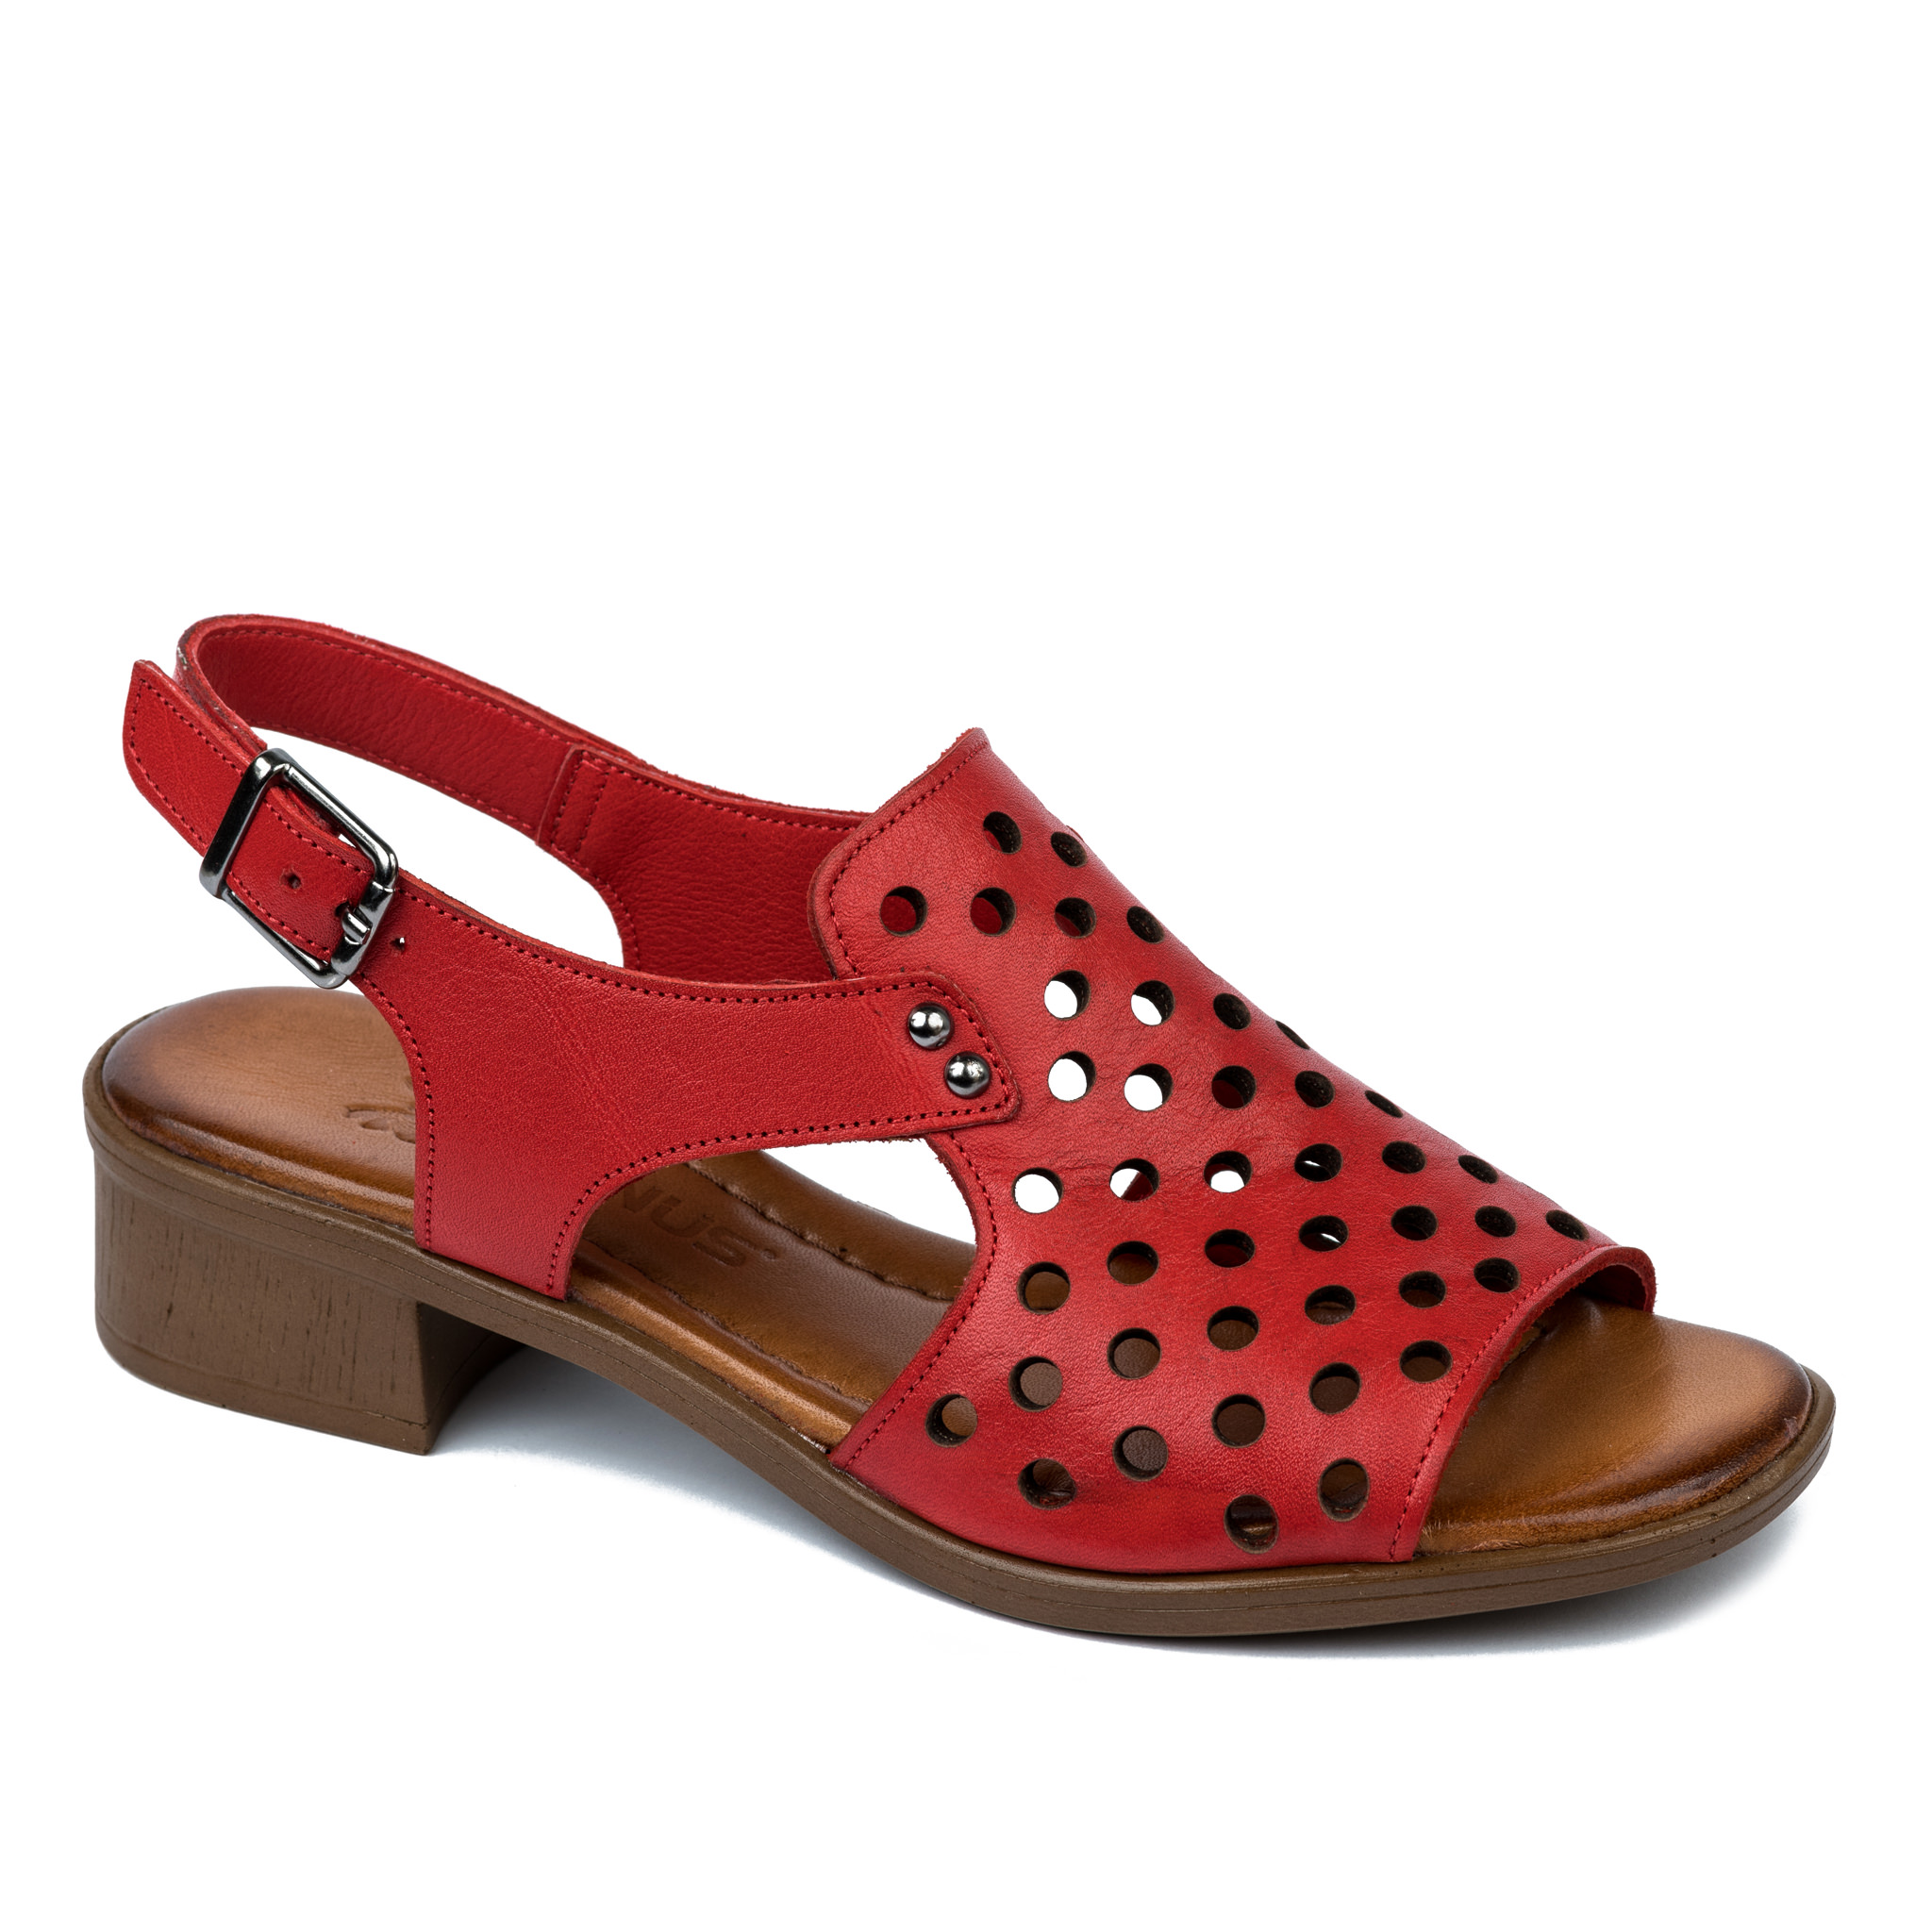 Leather sandals A473 - RED